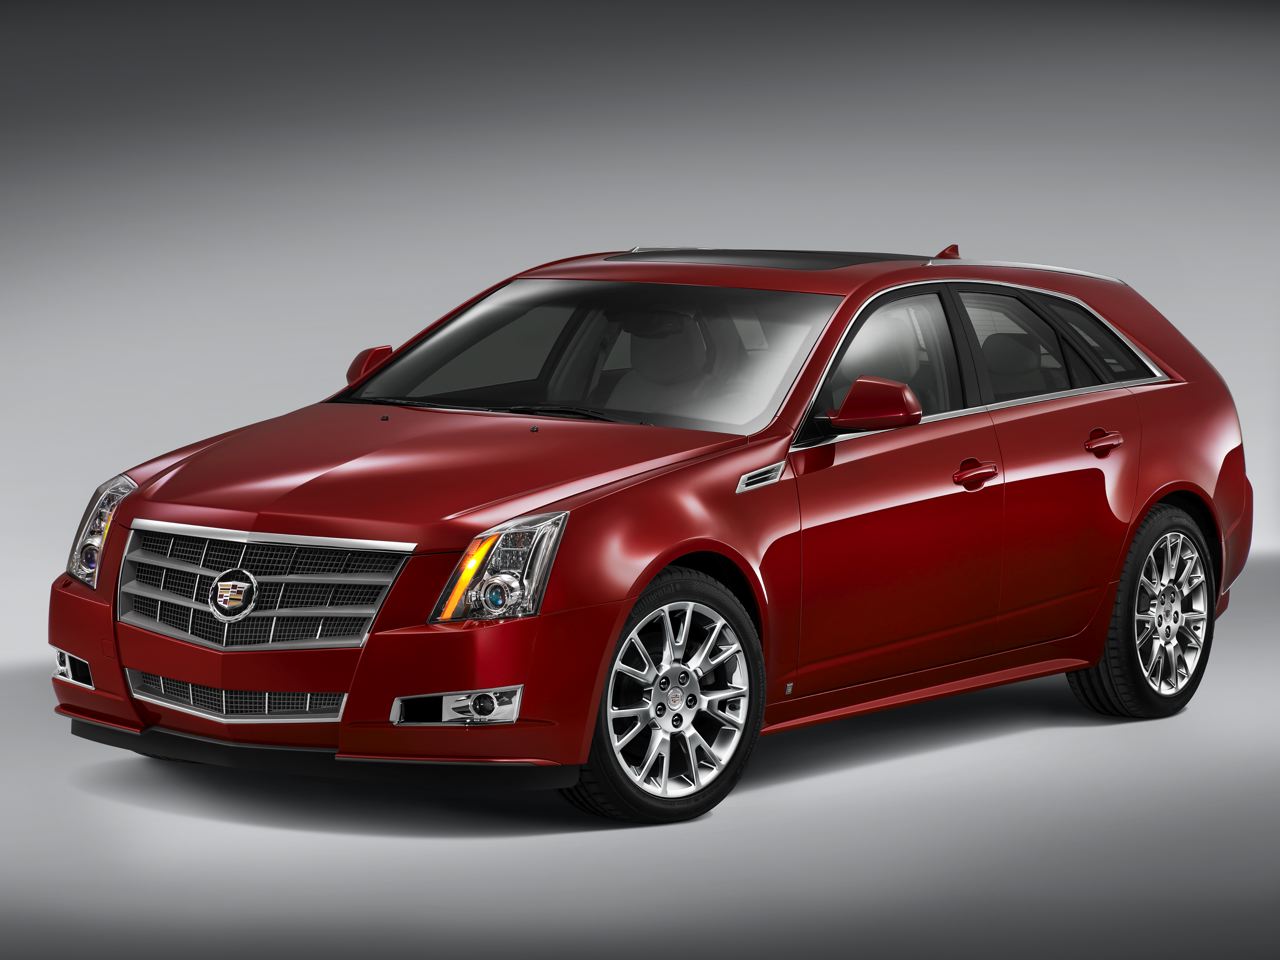 2010 Cadillac CTS Gallery Images vIEW